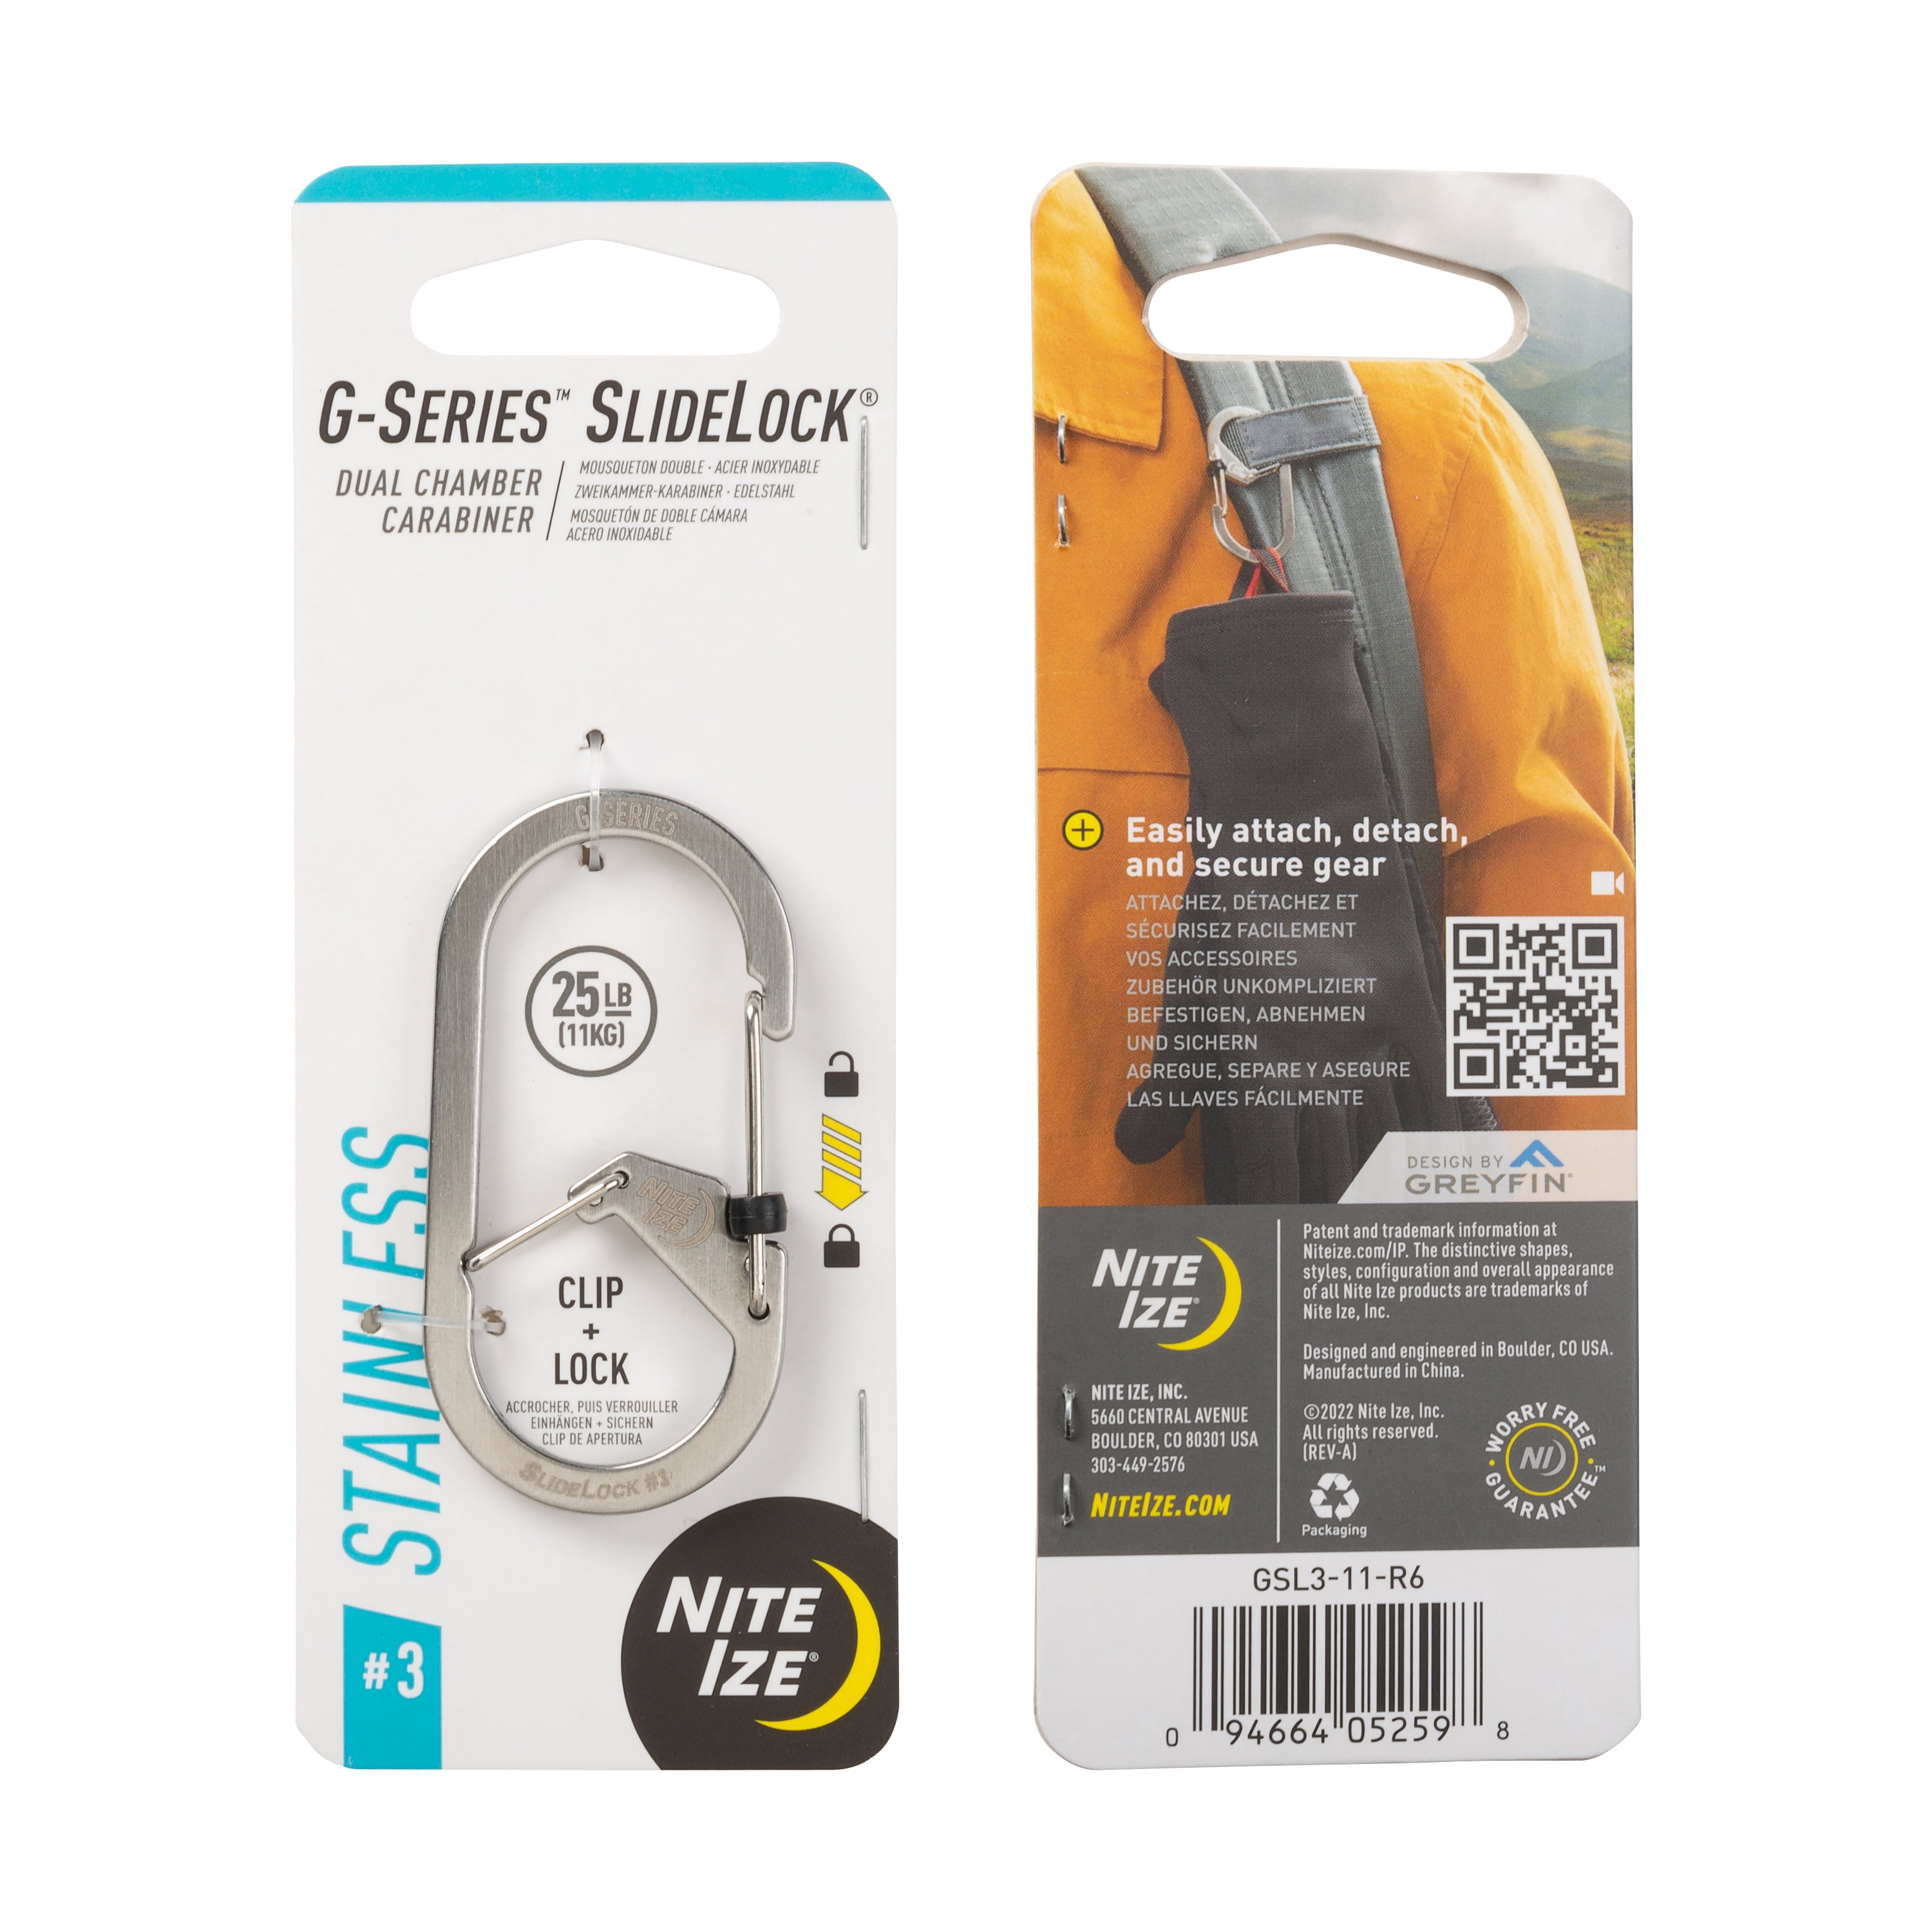 Nite Ize Stainless Steel G-Series Biner #3 - Black, Easy to Secure +  Remove, Dual Chambers for Added Security